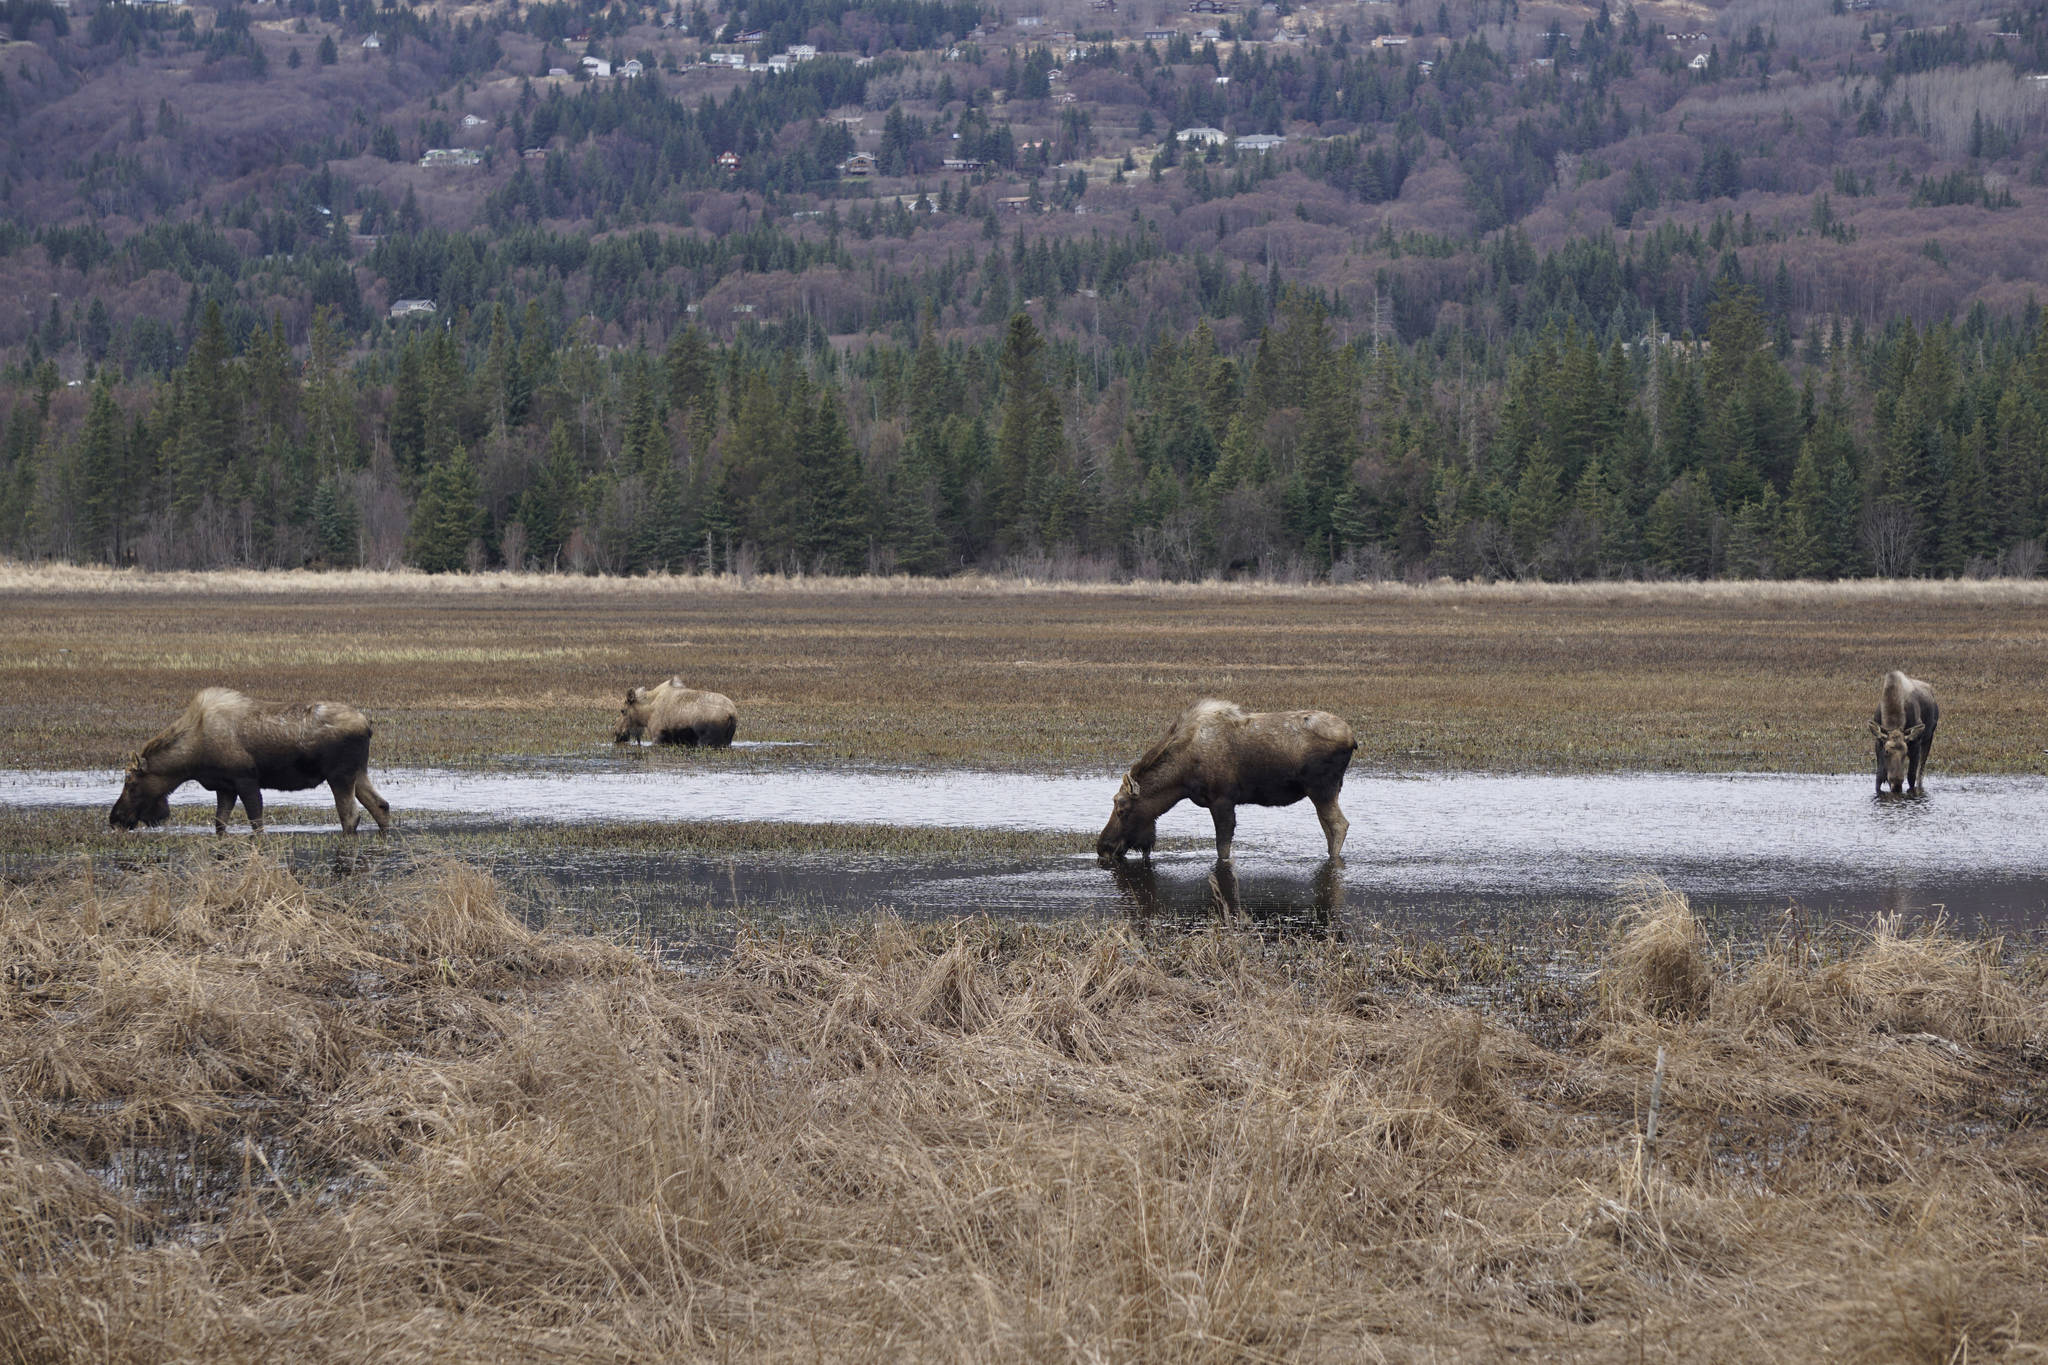 Moose browse at the east end of Beluga Lake about 6 p.m. Thursday, April 11, 2019, as seen from the airport viewing platform at the end of FAA Road in Homer, Alaska. (Photo by Michael Armstrong/Homer News)